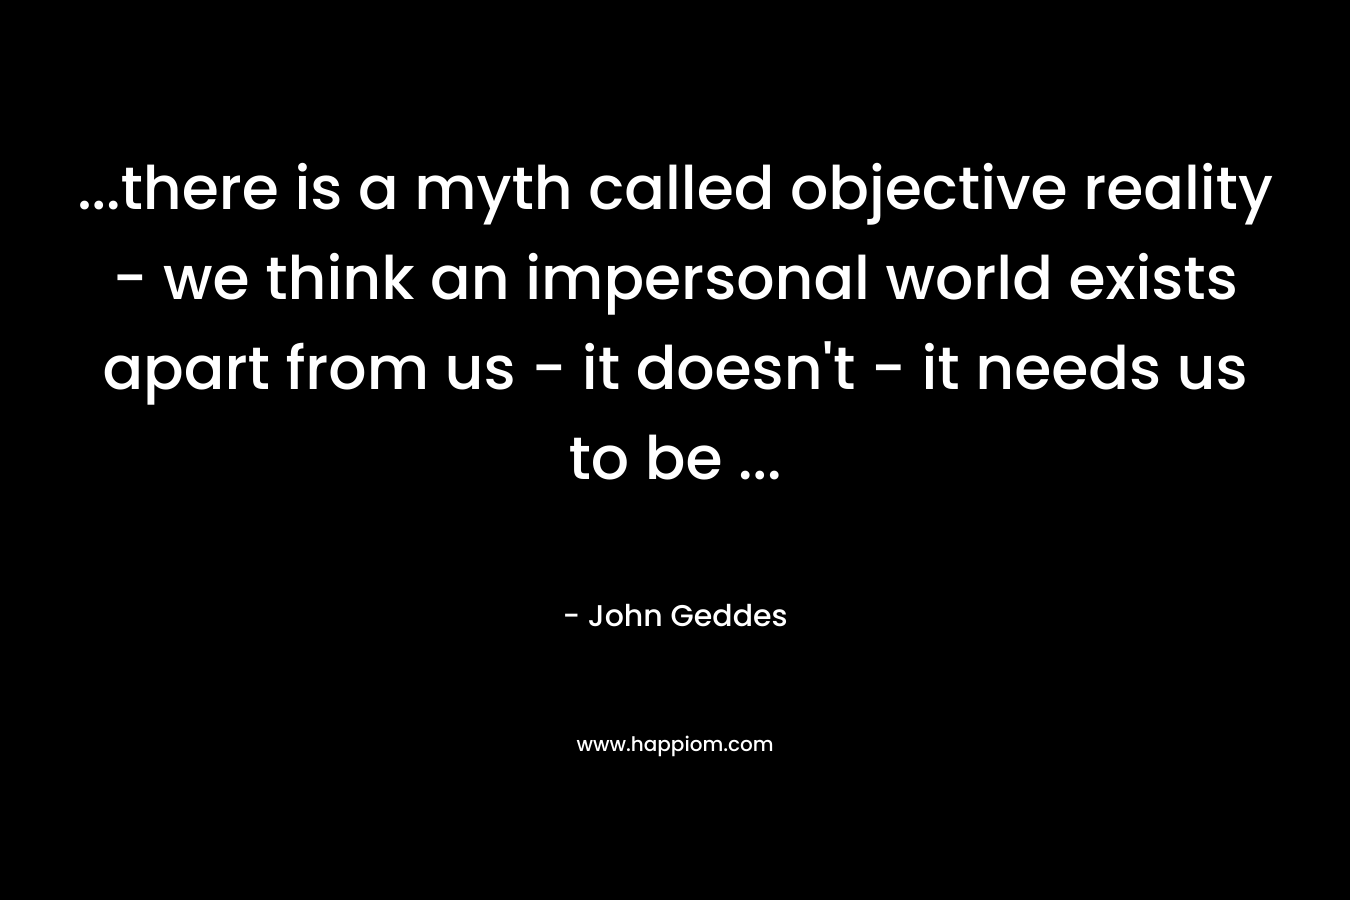 ...there is a myth called objective reality - we think an impersonal world exists apart from us - it doesn't - it needs us to be ...